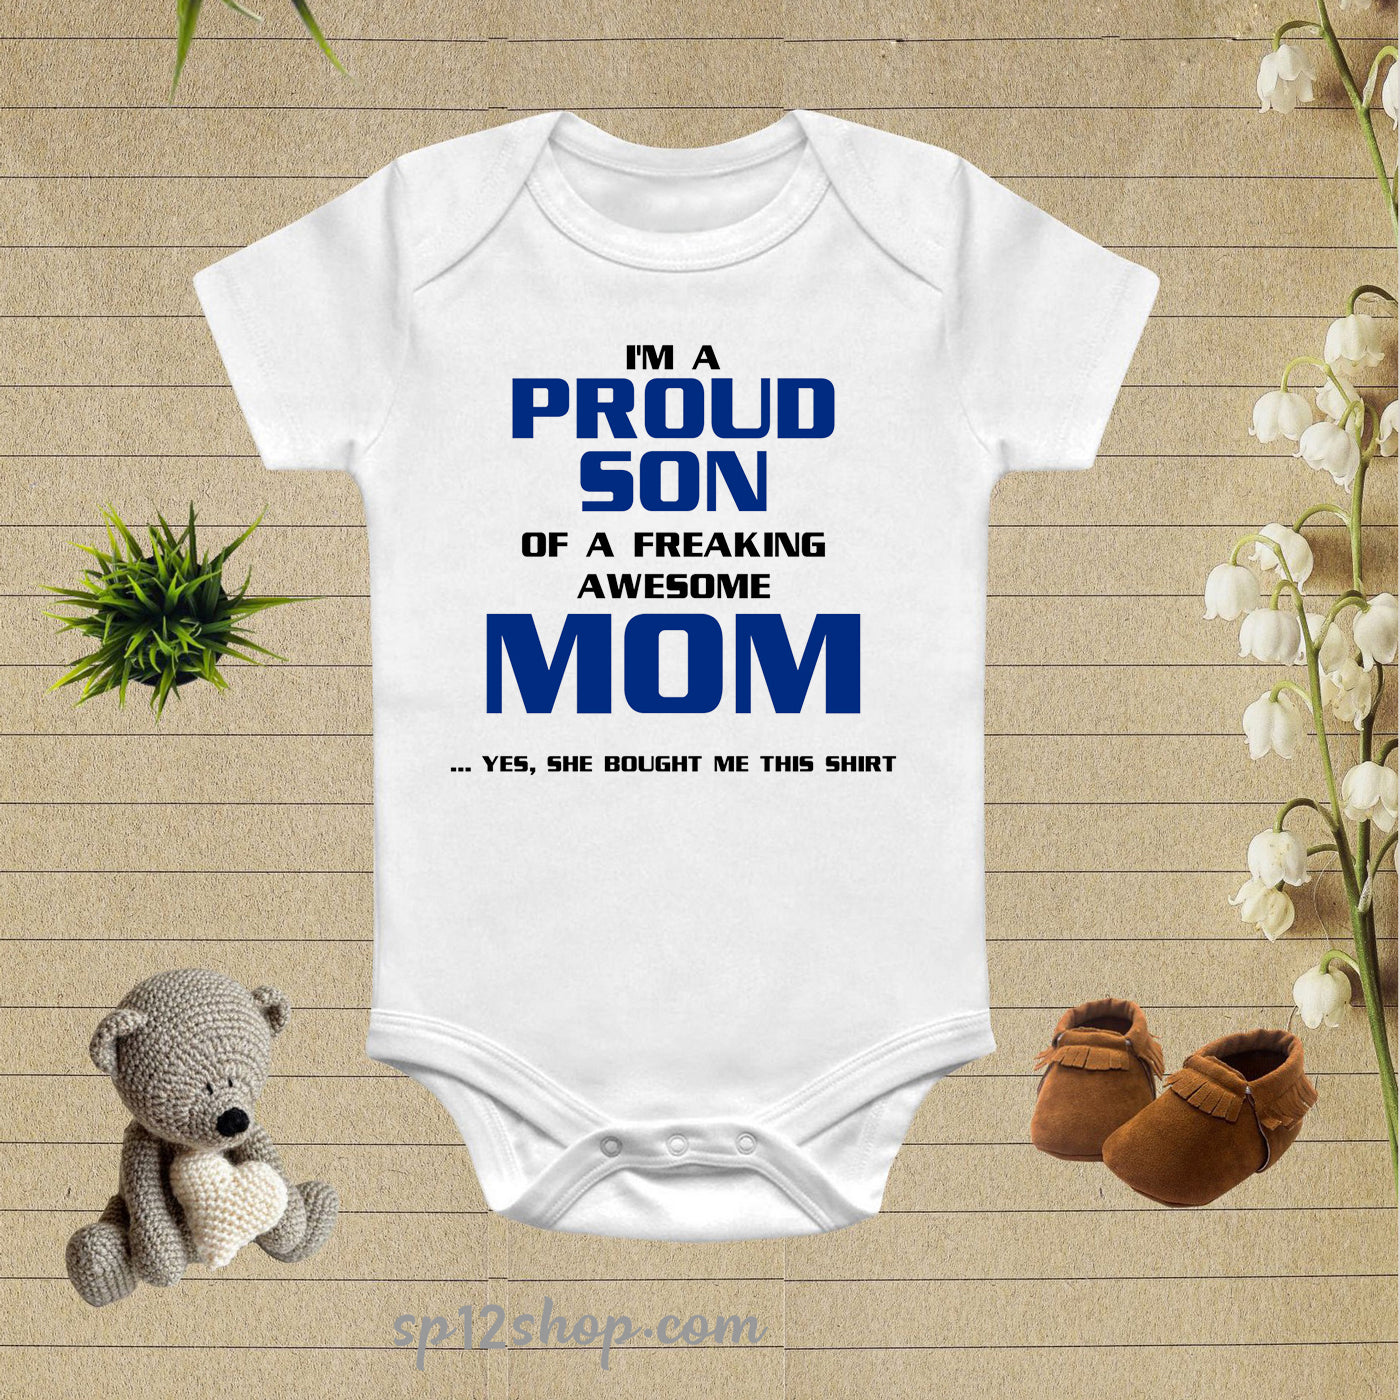 I'm A Proud Son of A Freaking Awesome Mom Baby Bodysuit Onesie